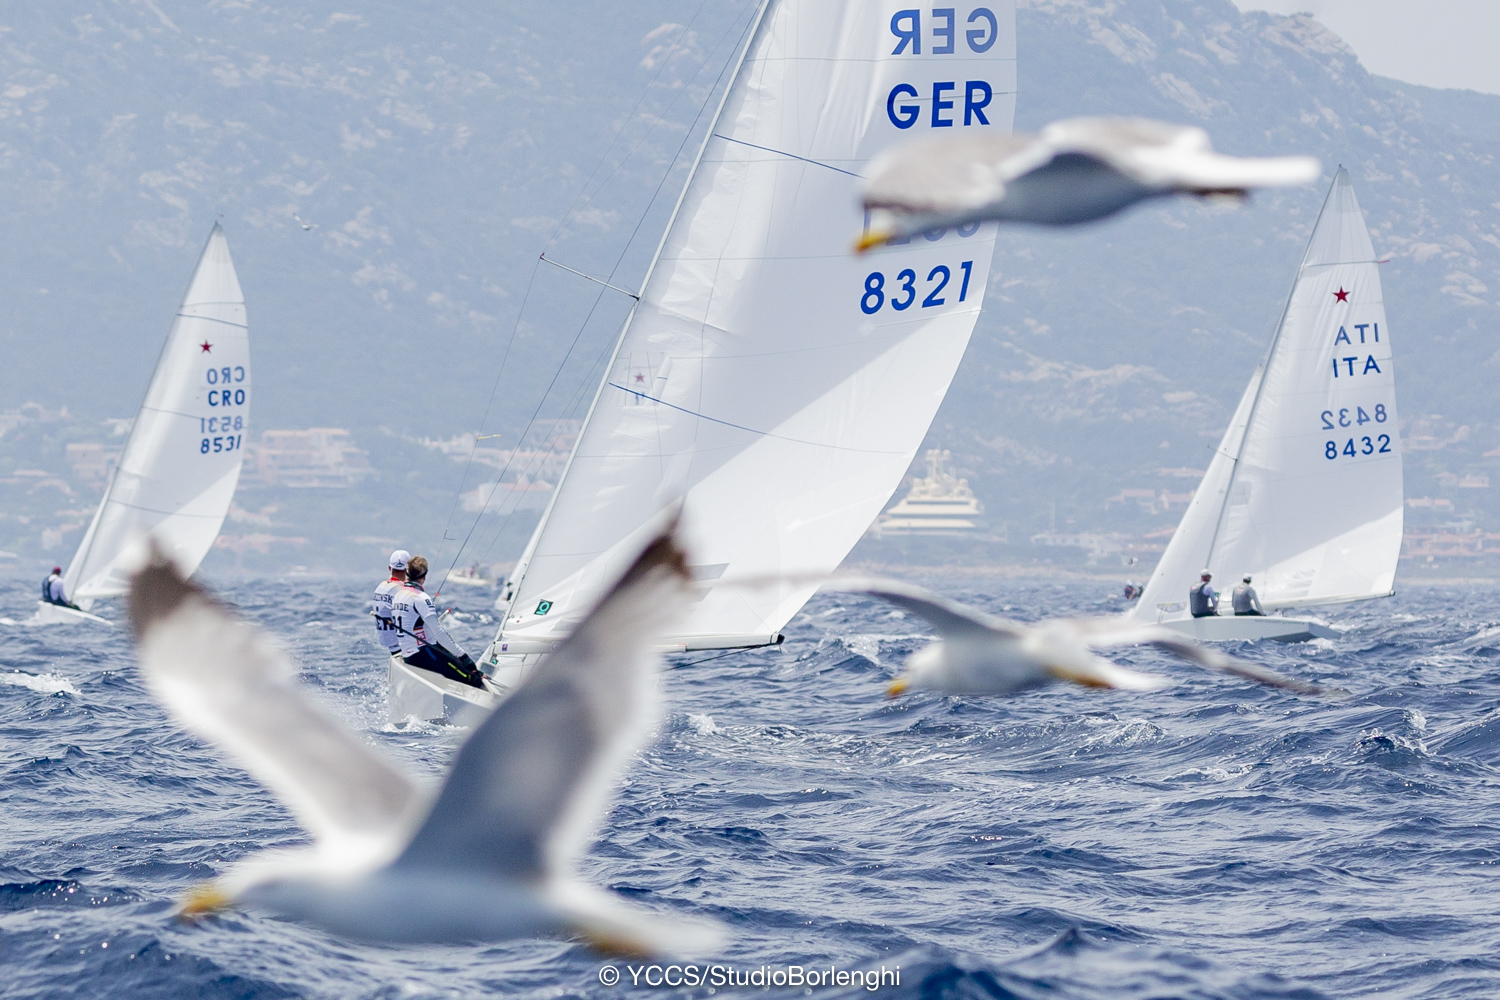 STAR WORLD CHAMPIONSHIP - IMAGES FROM DAY 5 ONLINE - News - Yacht Club Costa Smeralda